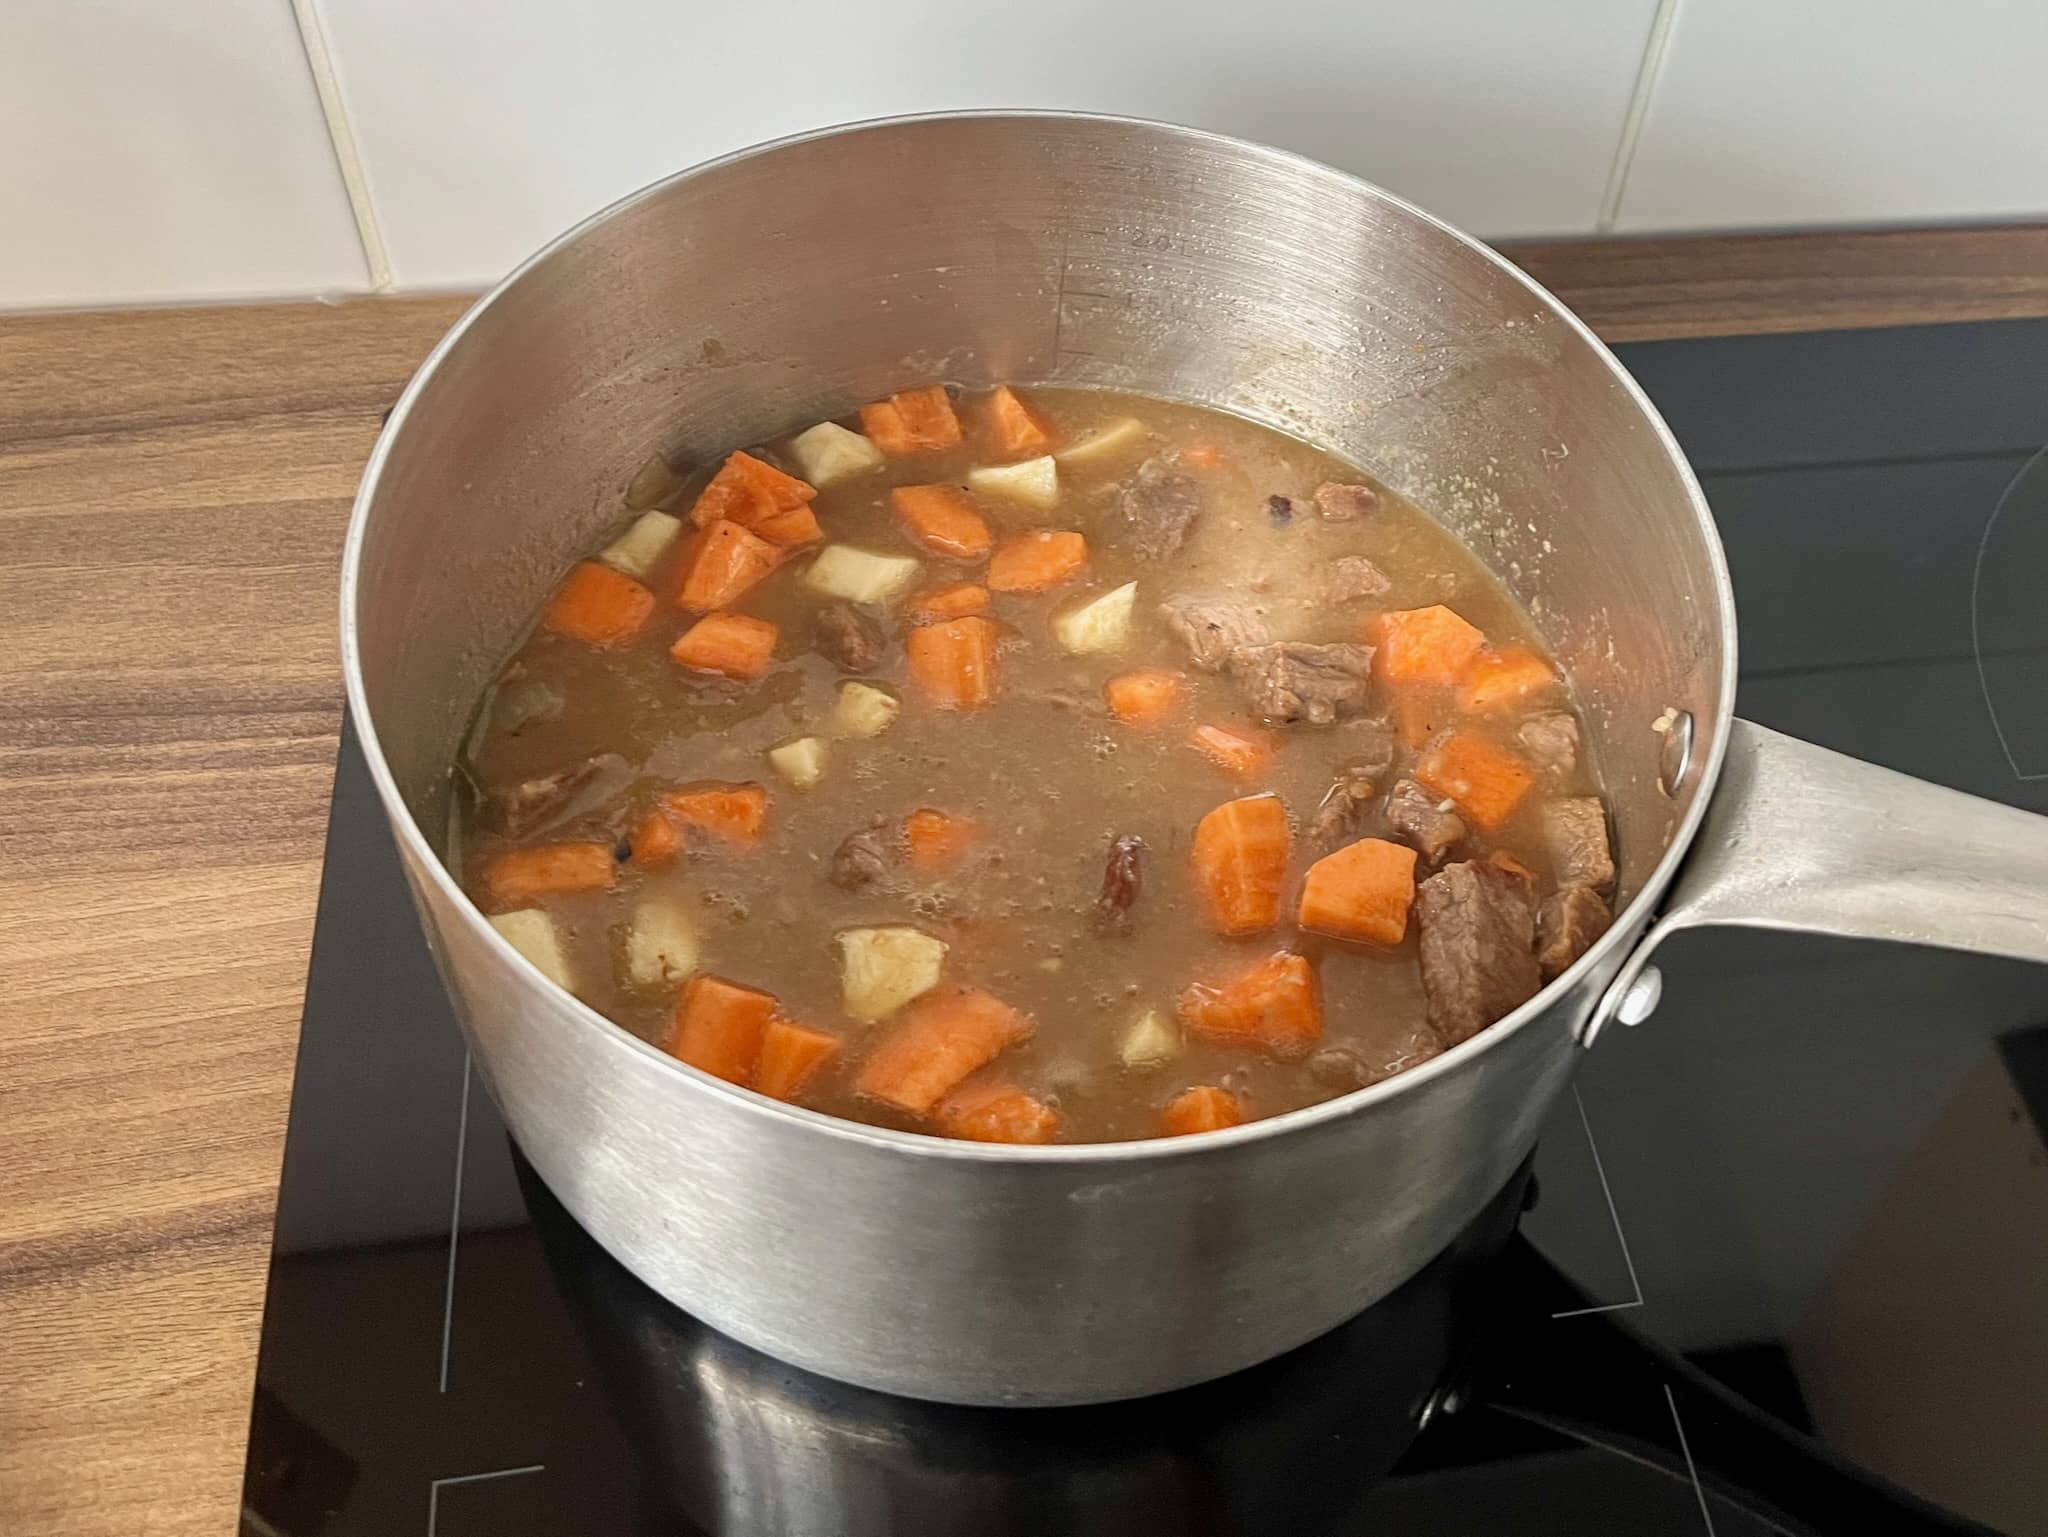 Beef Casserole in progress with added vegetable